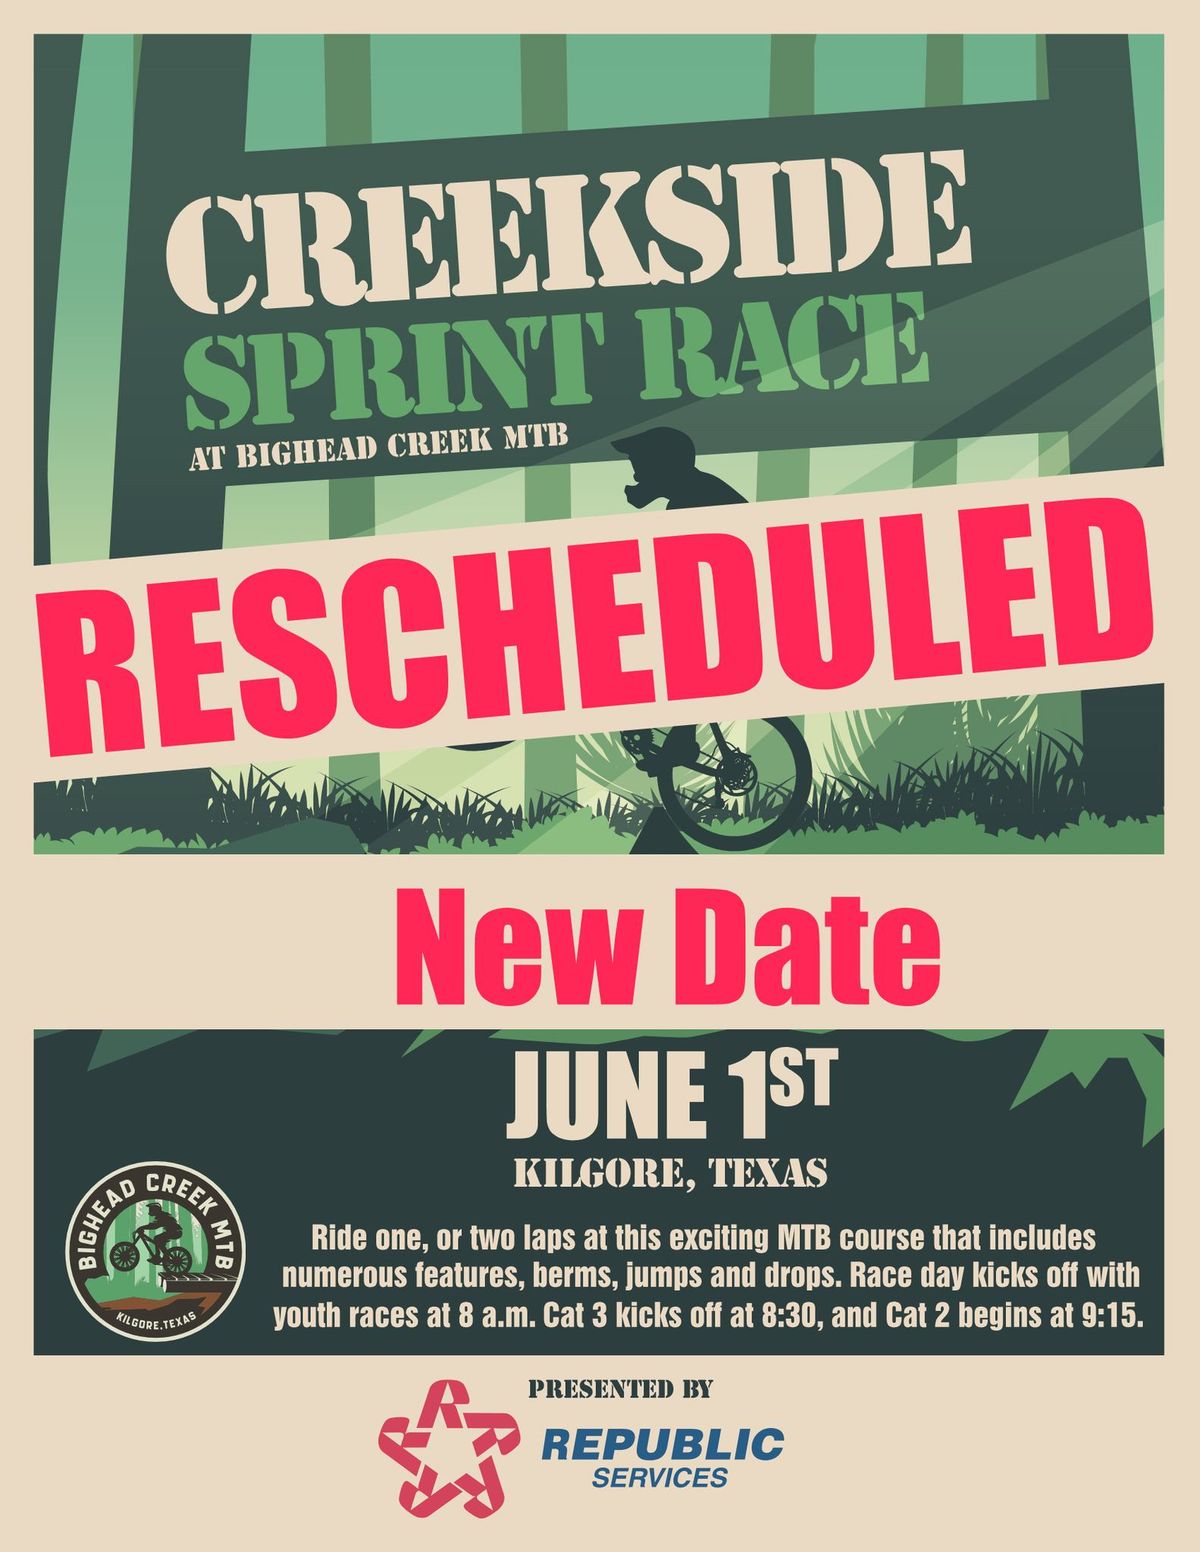 4th Annual Creekside Sprint Race - 4th race of the Shred the Pines Series